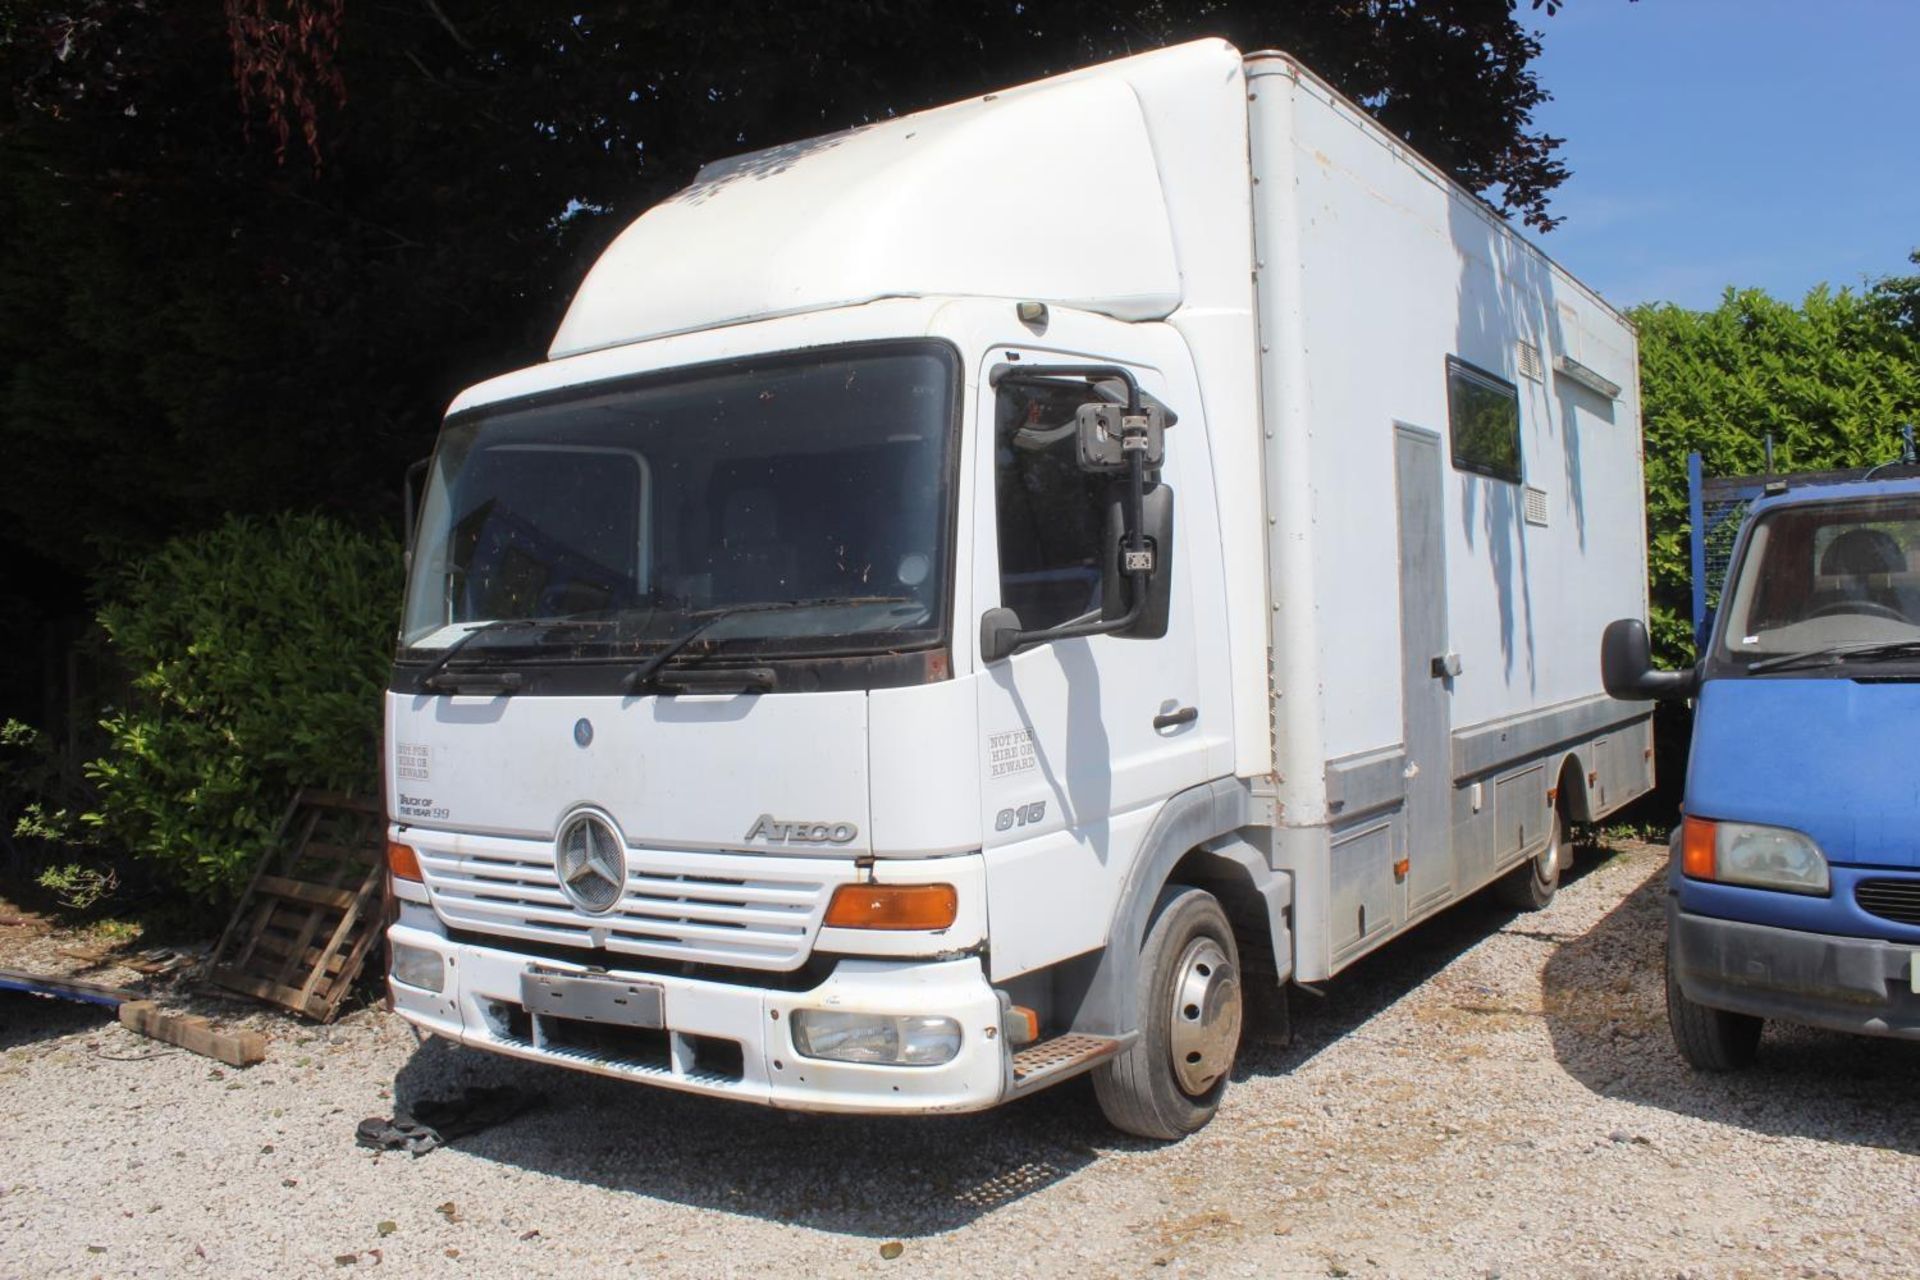 A 1999 815 MERCEDES BENZ ATEGO 7.5 TON HORSEBOX, REGISTERED AS A MOTOR HOME ON A IV MOT 86,076 MILES - Image 2 of 3